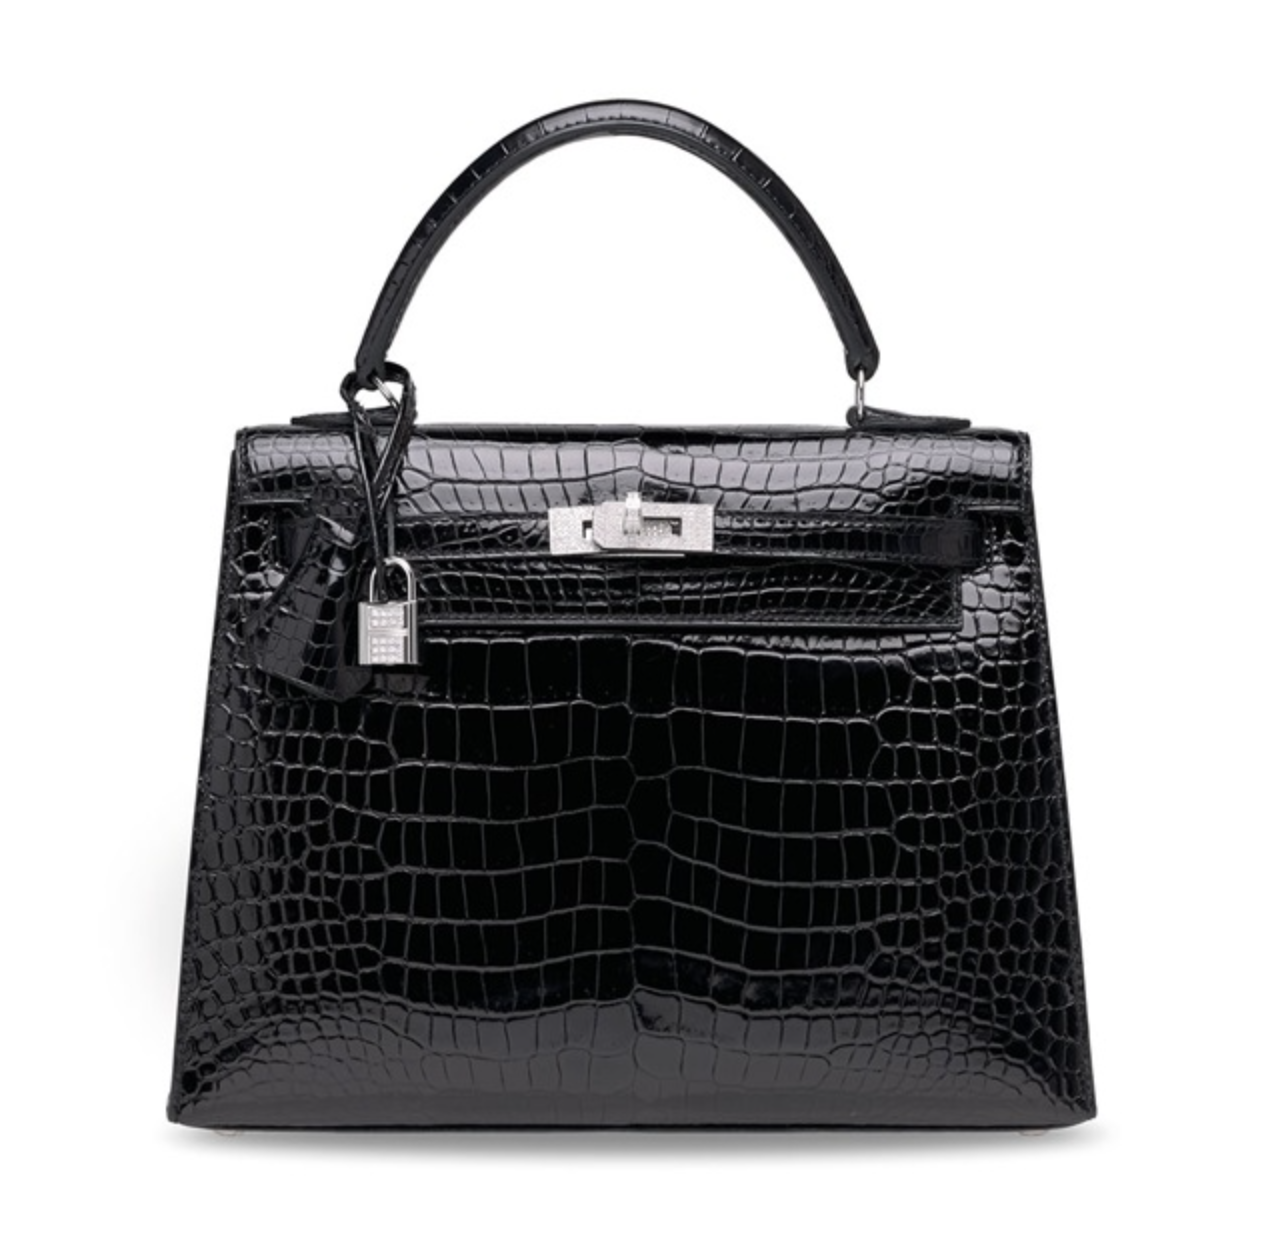 HERMES PRICE INCREASE FEB 2022 FOR BAGS!! *KELLY, CONSTANCE